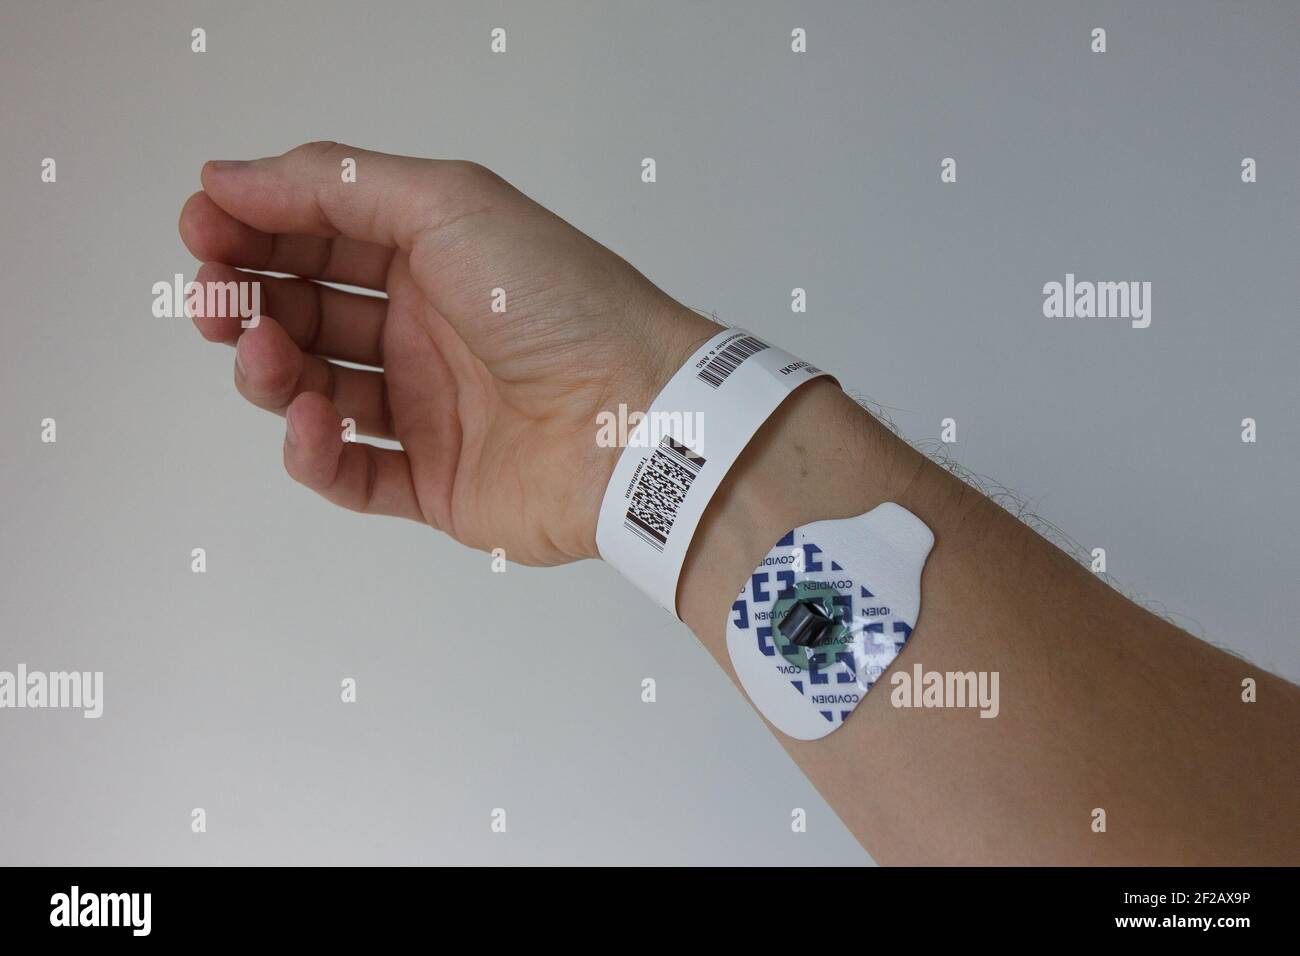 Hospital tag on wrist with ECG pad, white Caucasian, white, pale skin, id tag, hospital tag, ecg pad, palm of the hand, right hand, fingers, wrist Stock Photo